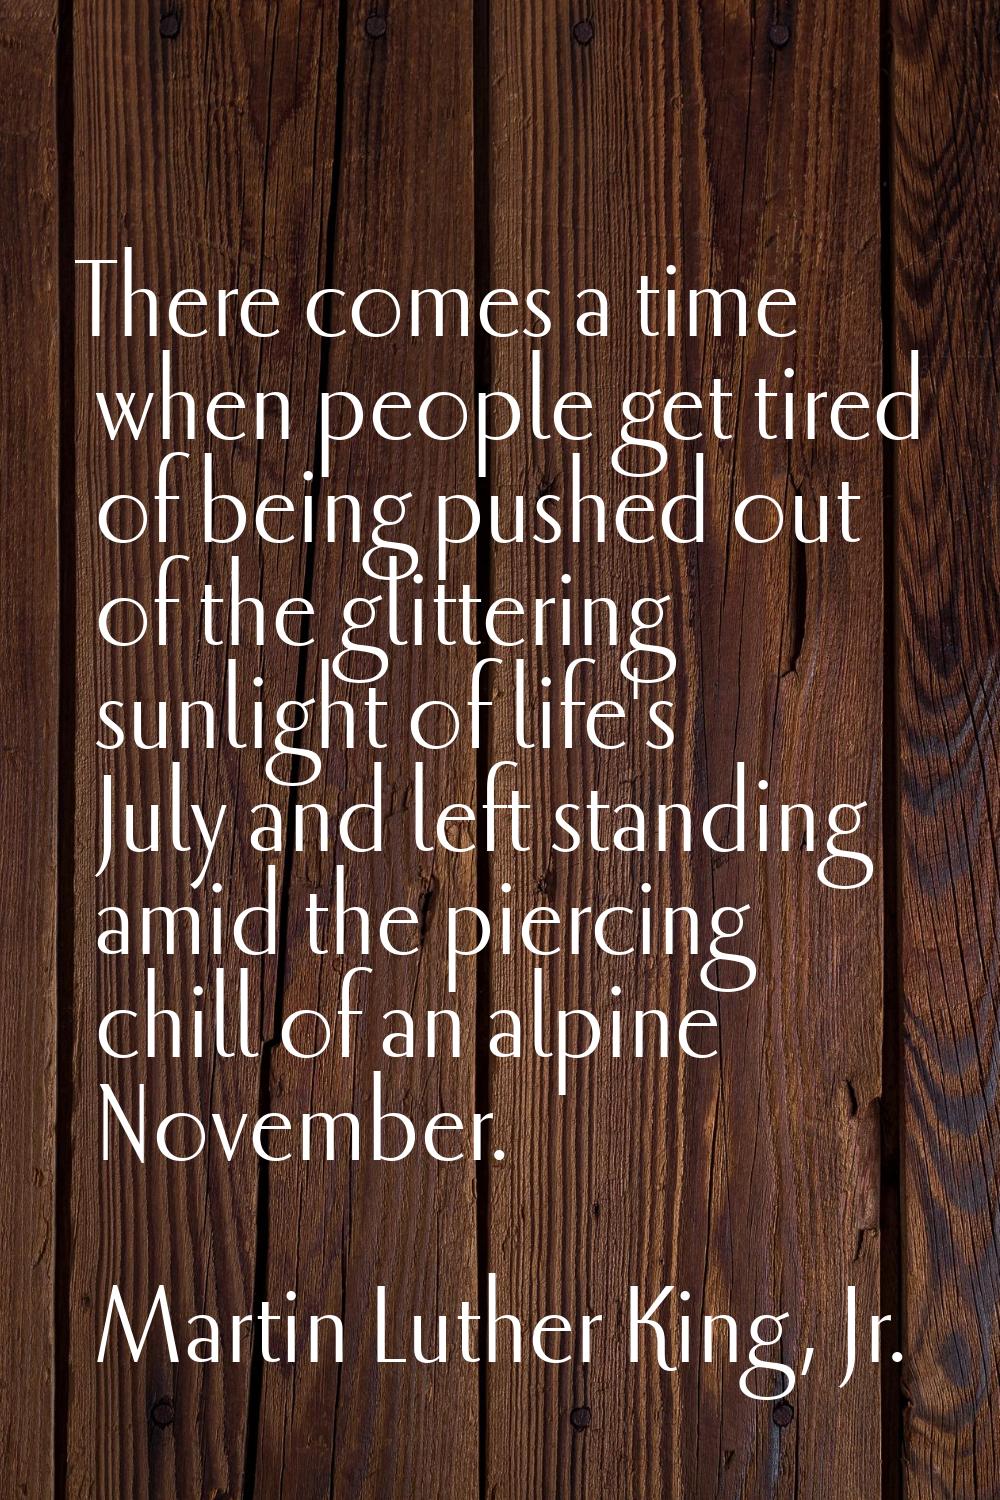 There comes a time when people get tired of being pushed out of the glittering sunlight of life's J